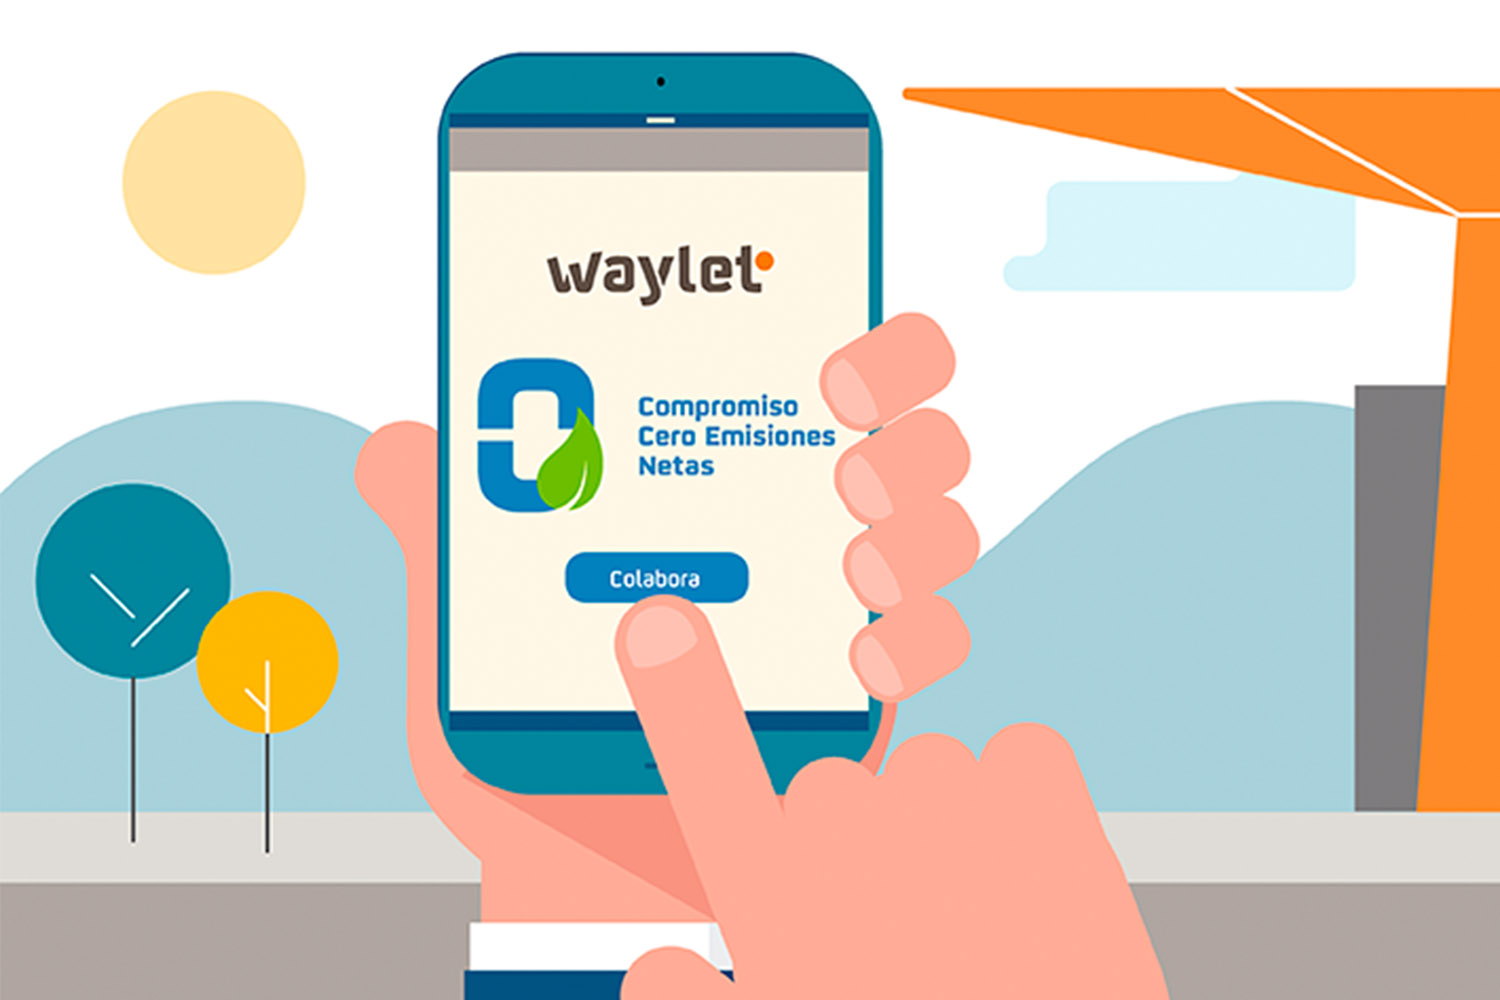 A smartphone with the Waylet app